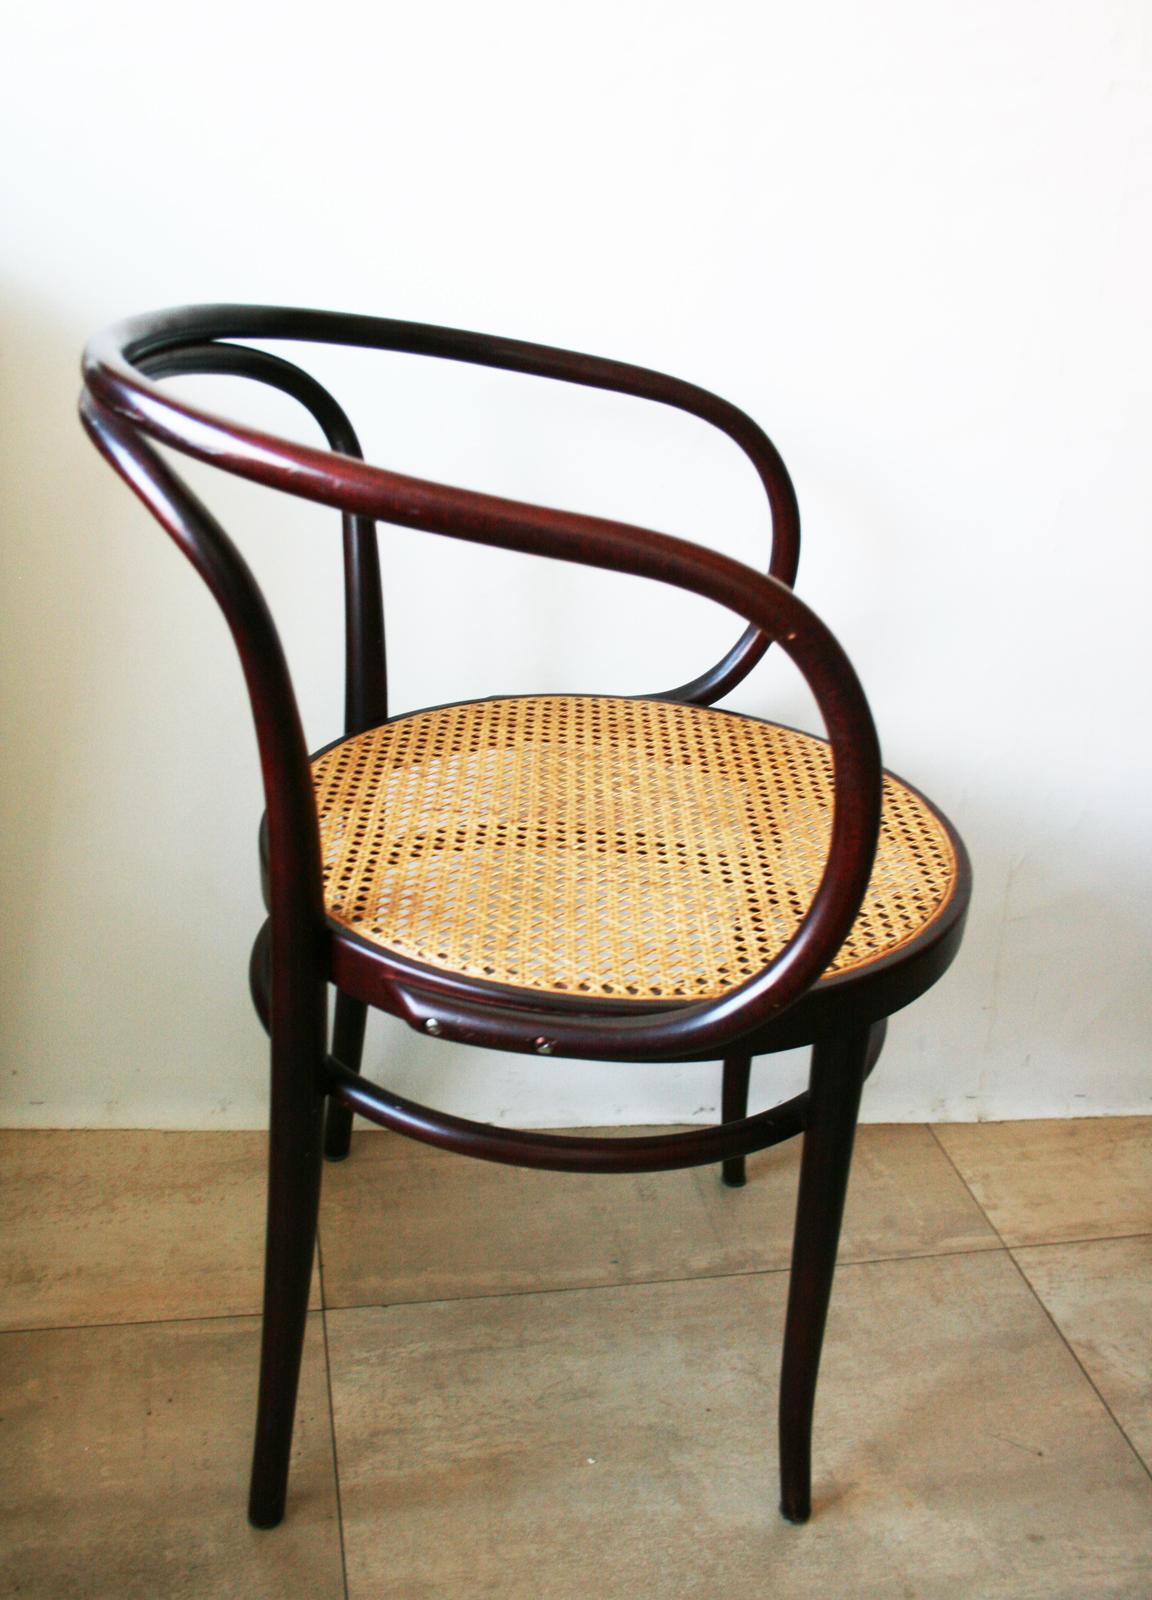 Pair of chairs after Thonet, from the years between 1955-1965.
209 Thonet Chair
They are in very very good condition, they are hardly used, almost like new


This is Le Corbusier's favorite chair and one of the favorite designs of architects and